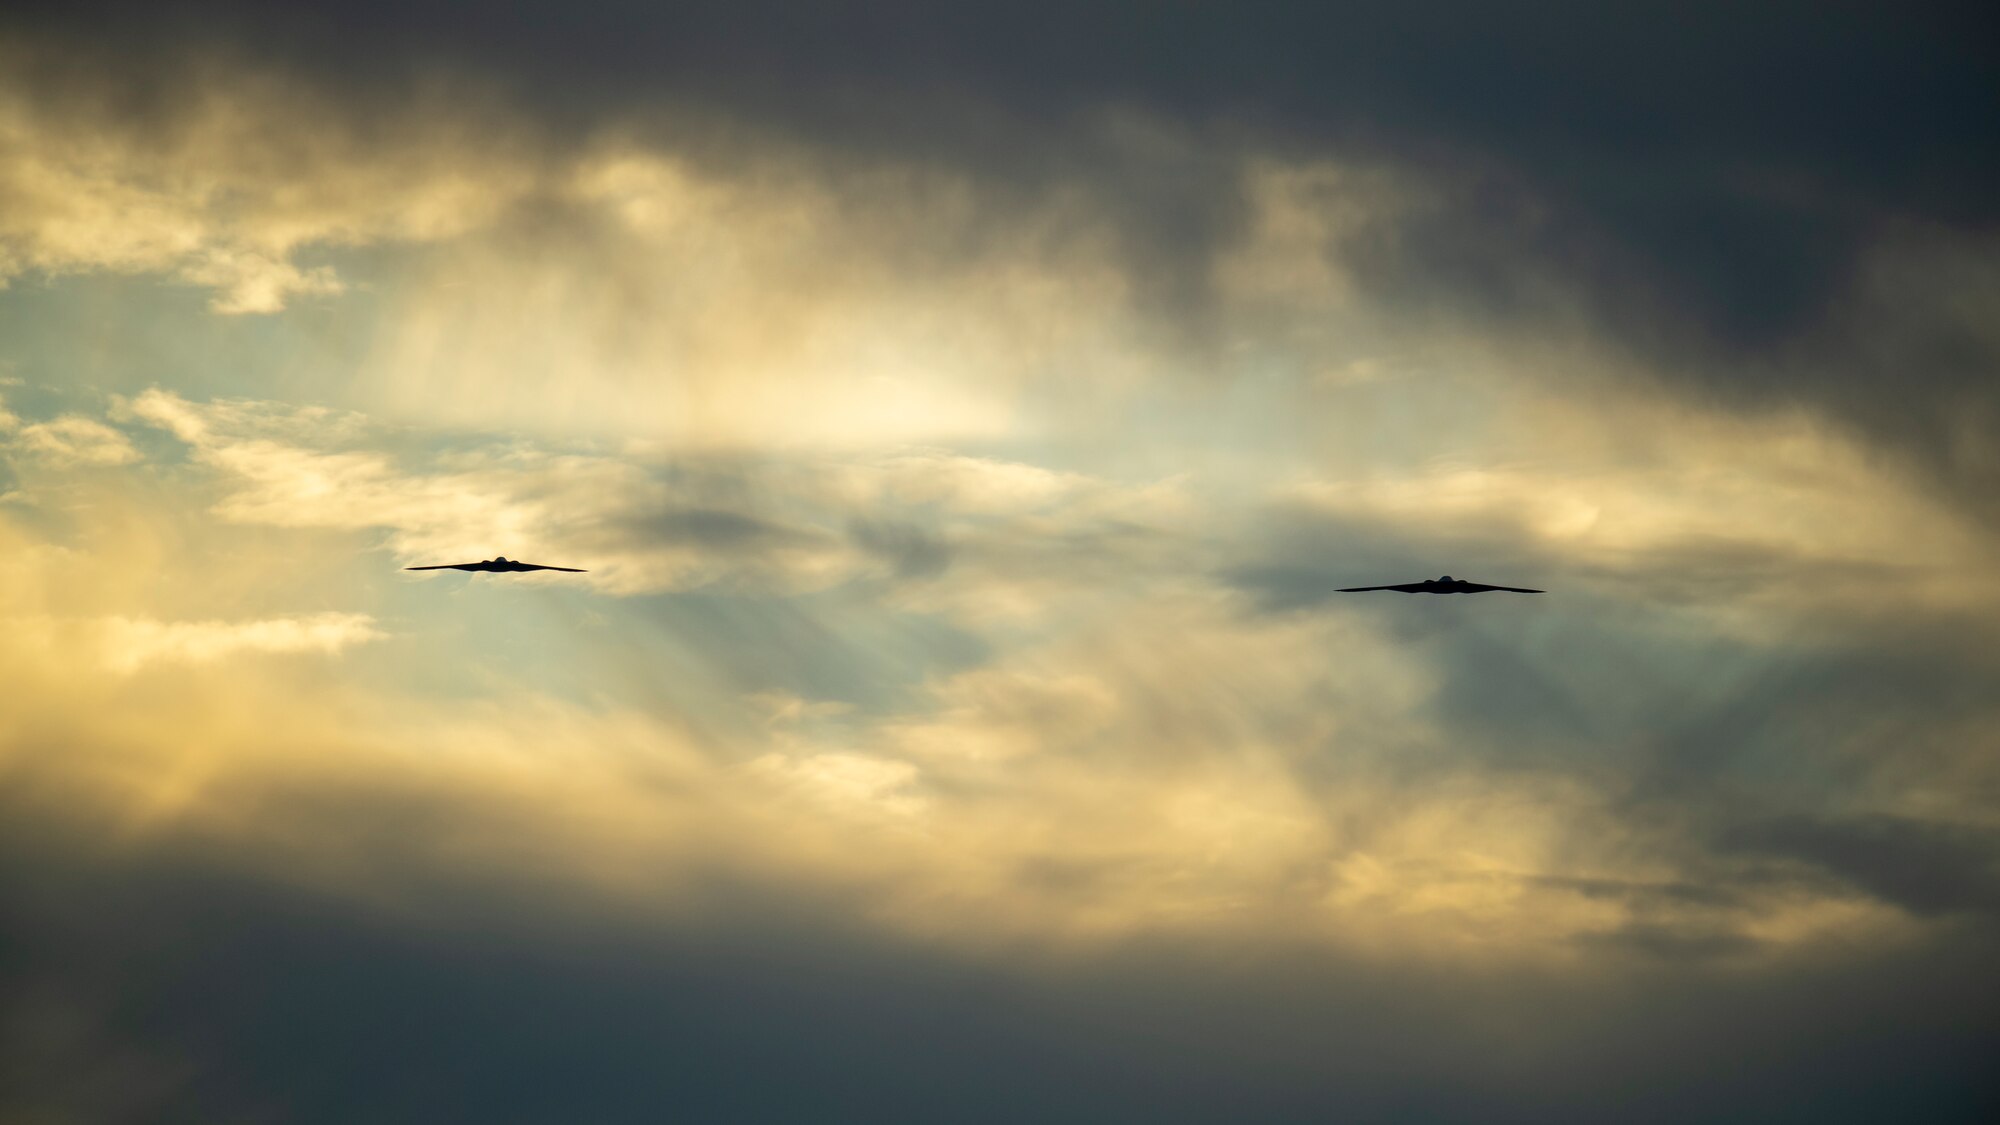 U.S. Air Force B-2 Spirit bombers assigned to the 509th Bomb Wing, Whiteman Air Force Base, Missouri, approach Luke Air Force Base, Arizona, Nov. 15, 2022.